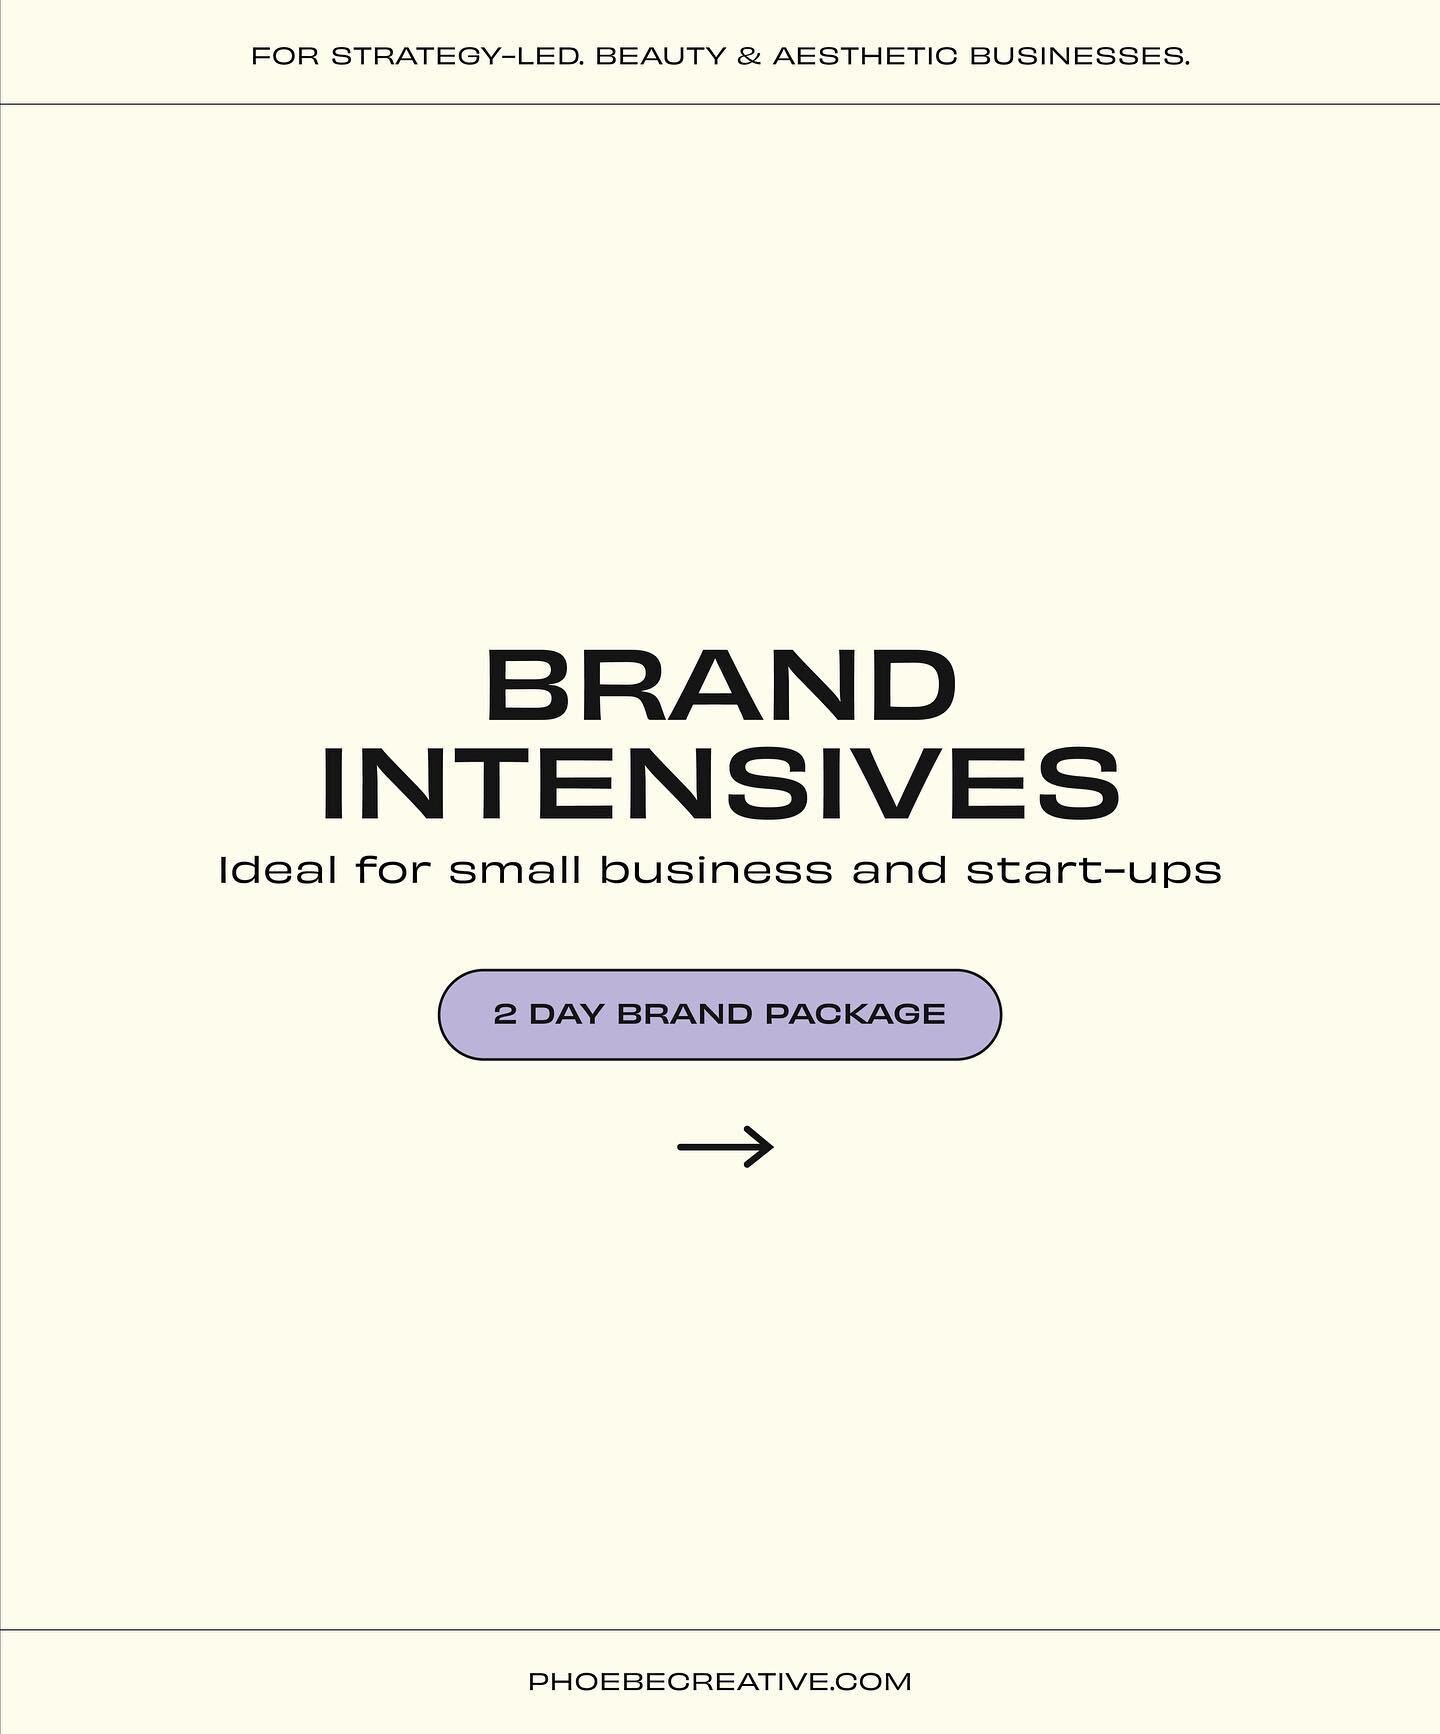 ⚡️ Let&rsquo;s talk BRAND INTENSIVES ⚡️
 
The perfect package for small business and start-ups! It encapsulates all the tools you need to have your branding looking cohesive and on point. 
 
It&rsquo;s a 2-day branding package that packs a punch. Inc